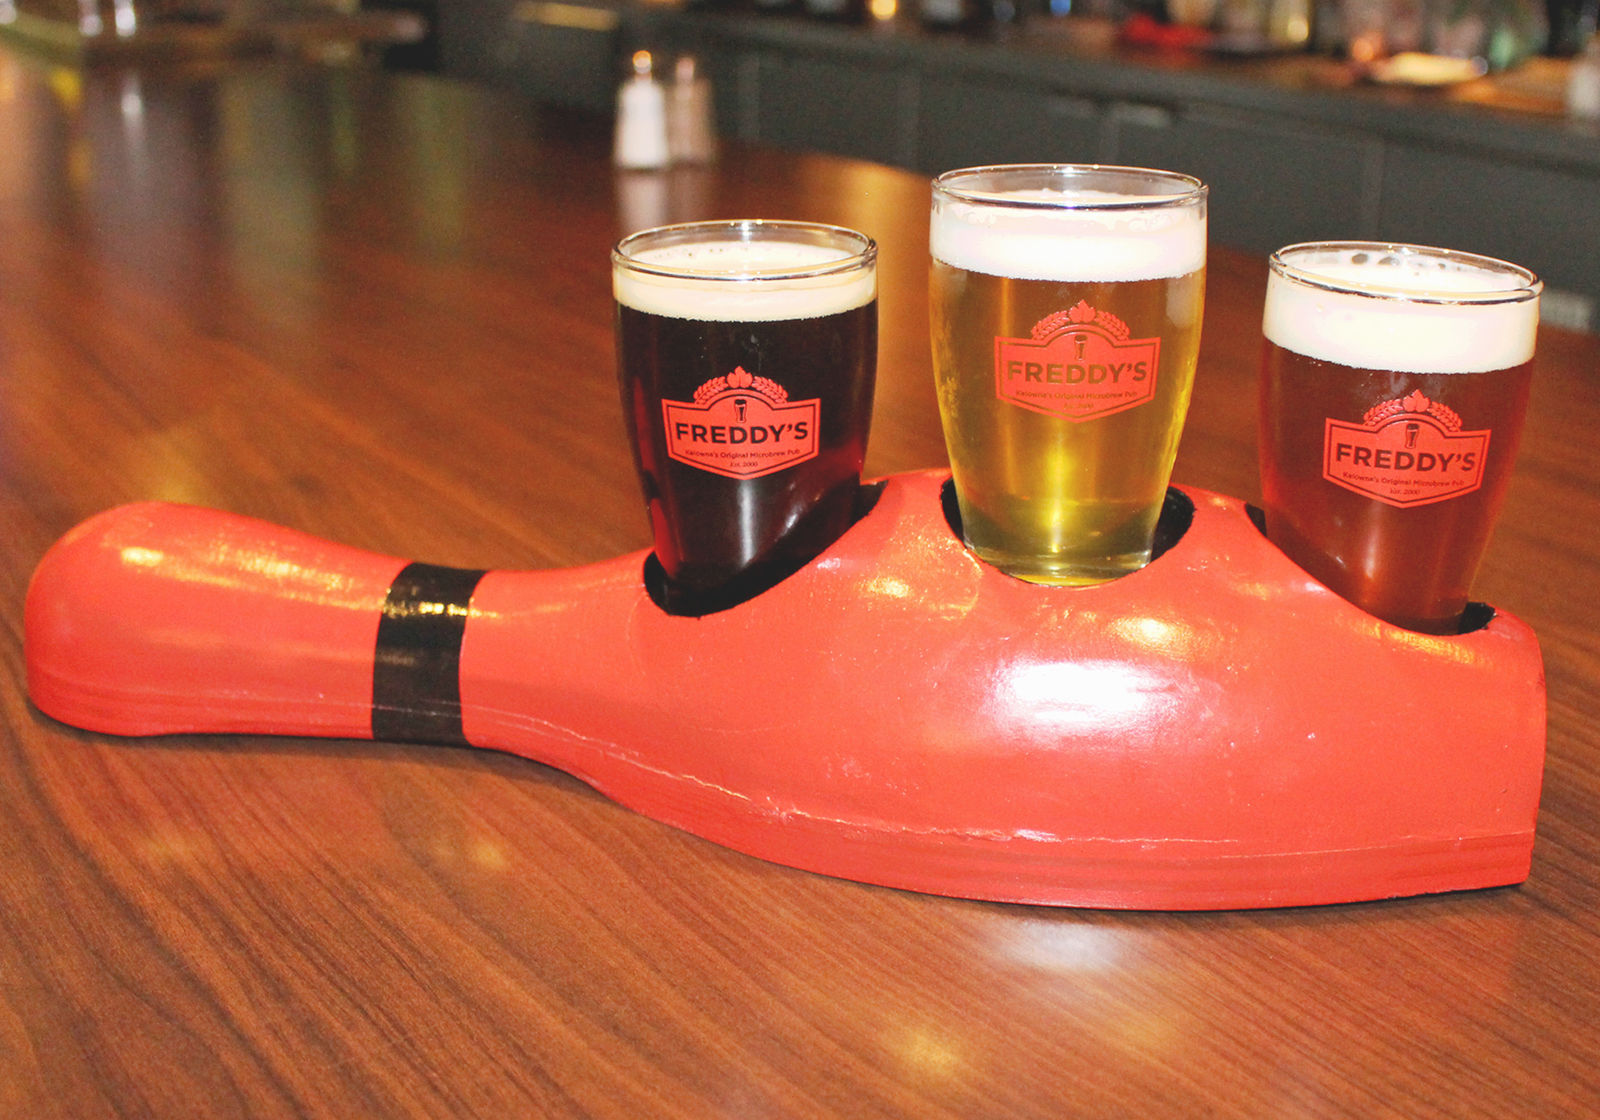 (Image courtesy of McCurdy Bowling Centre and Freddy's Brewpub) Bowl and try some of the tasty craft ales at Freddy's Brewpub in the McCurdy Bowling Centre, located just down the road from the Comfort Suites Kelowna hotel. 